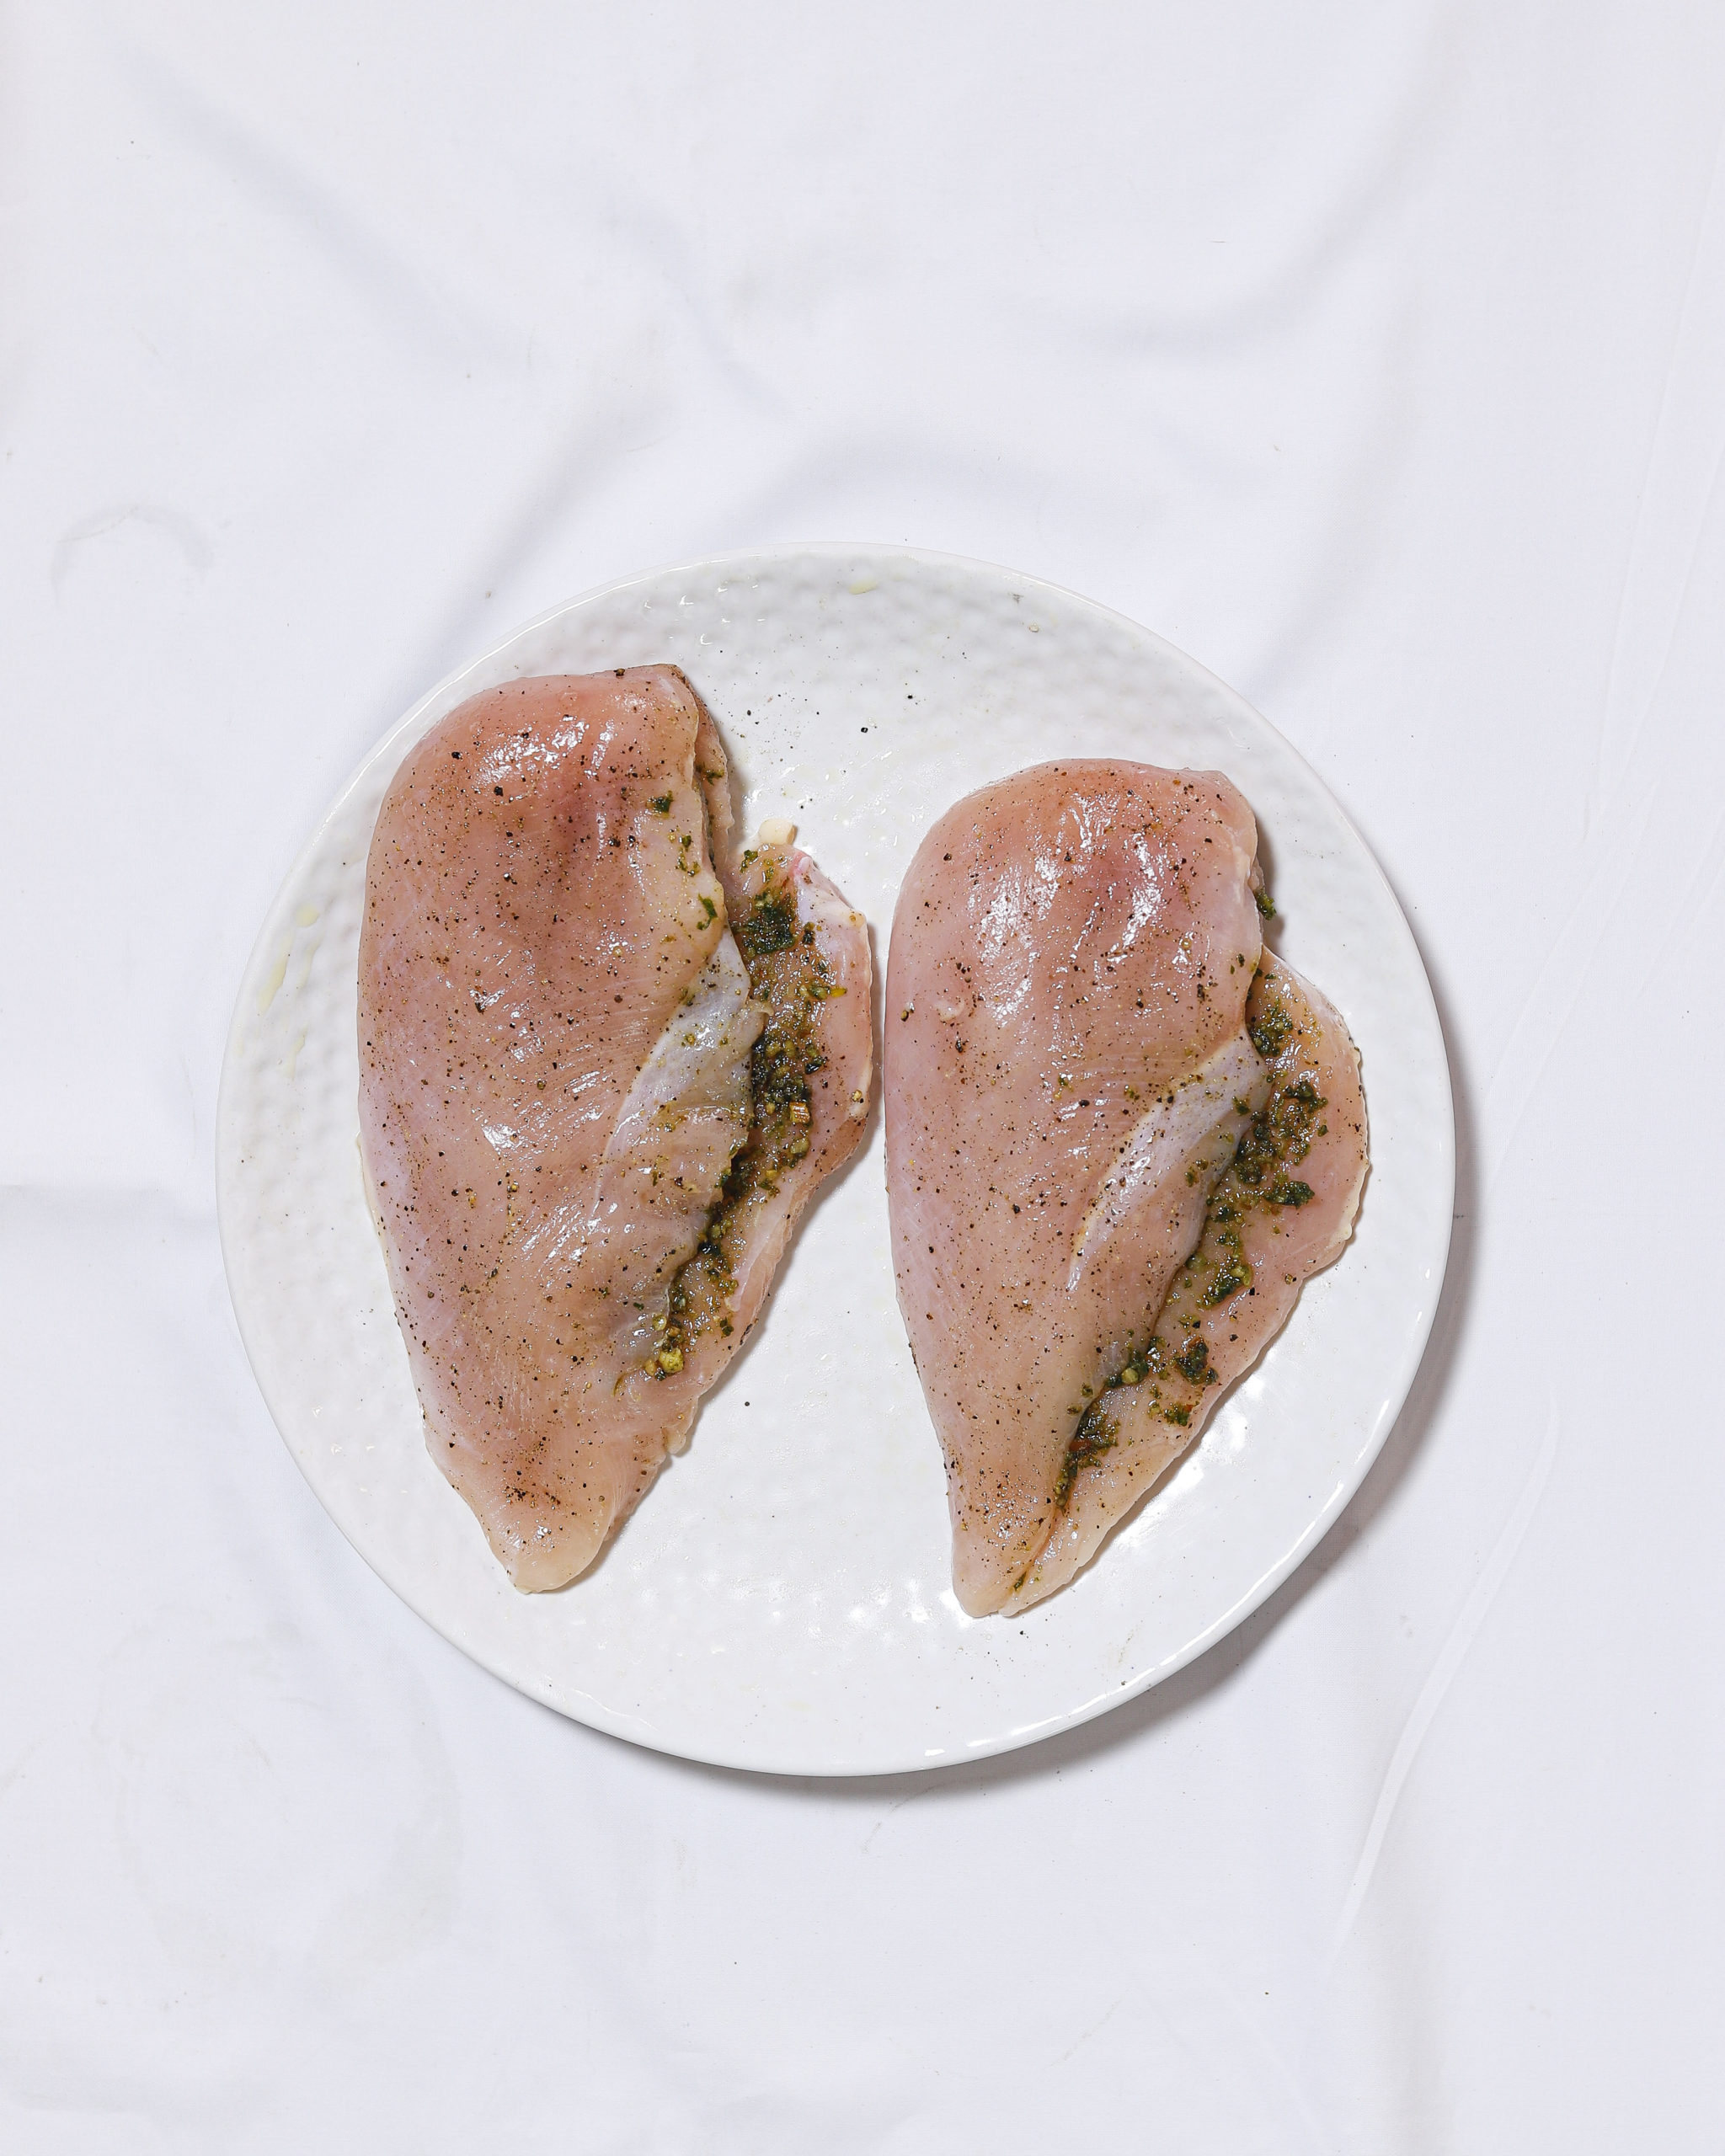 Raw chicken sliced with pesto inside on a white plate.